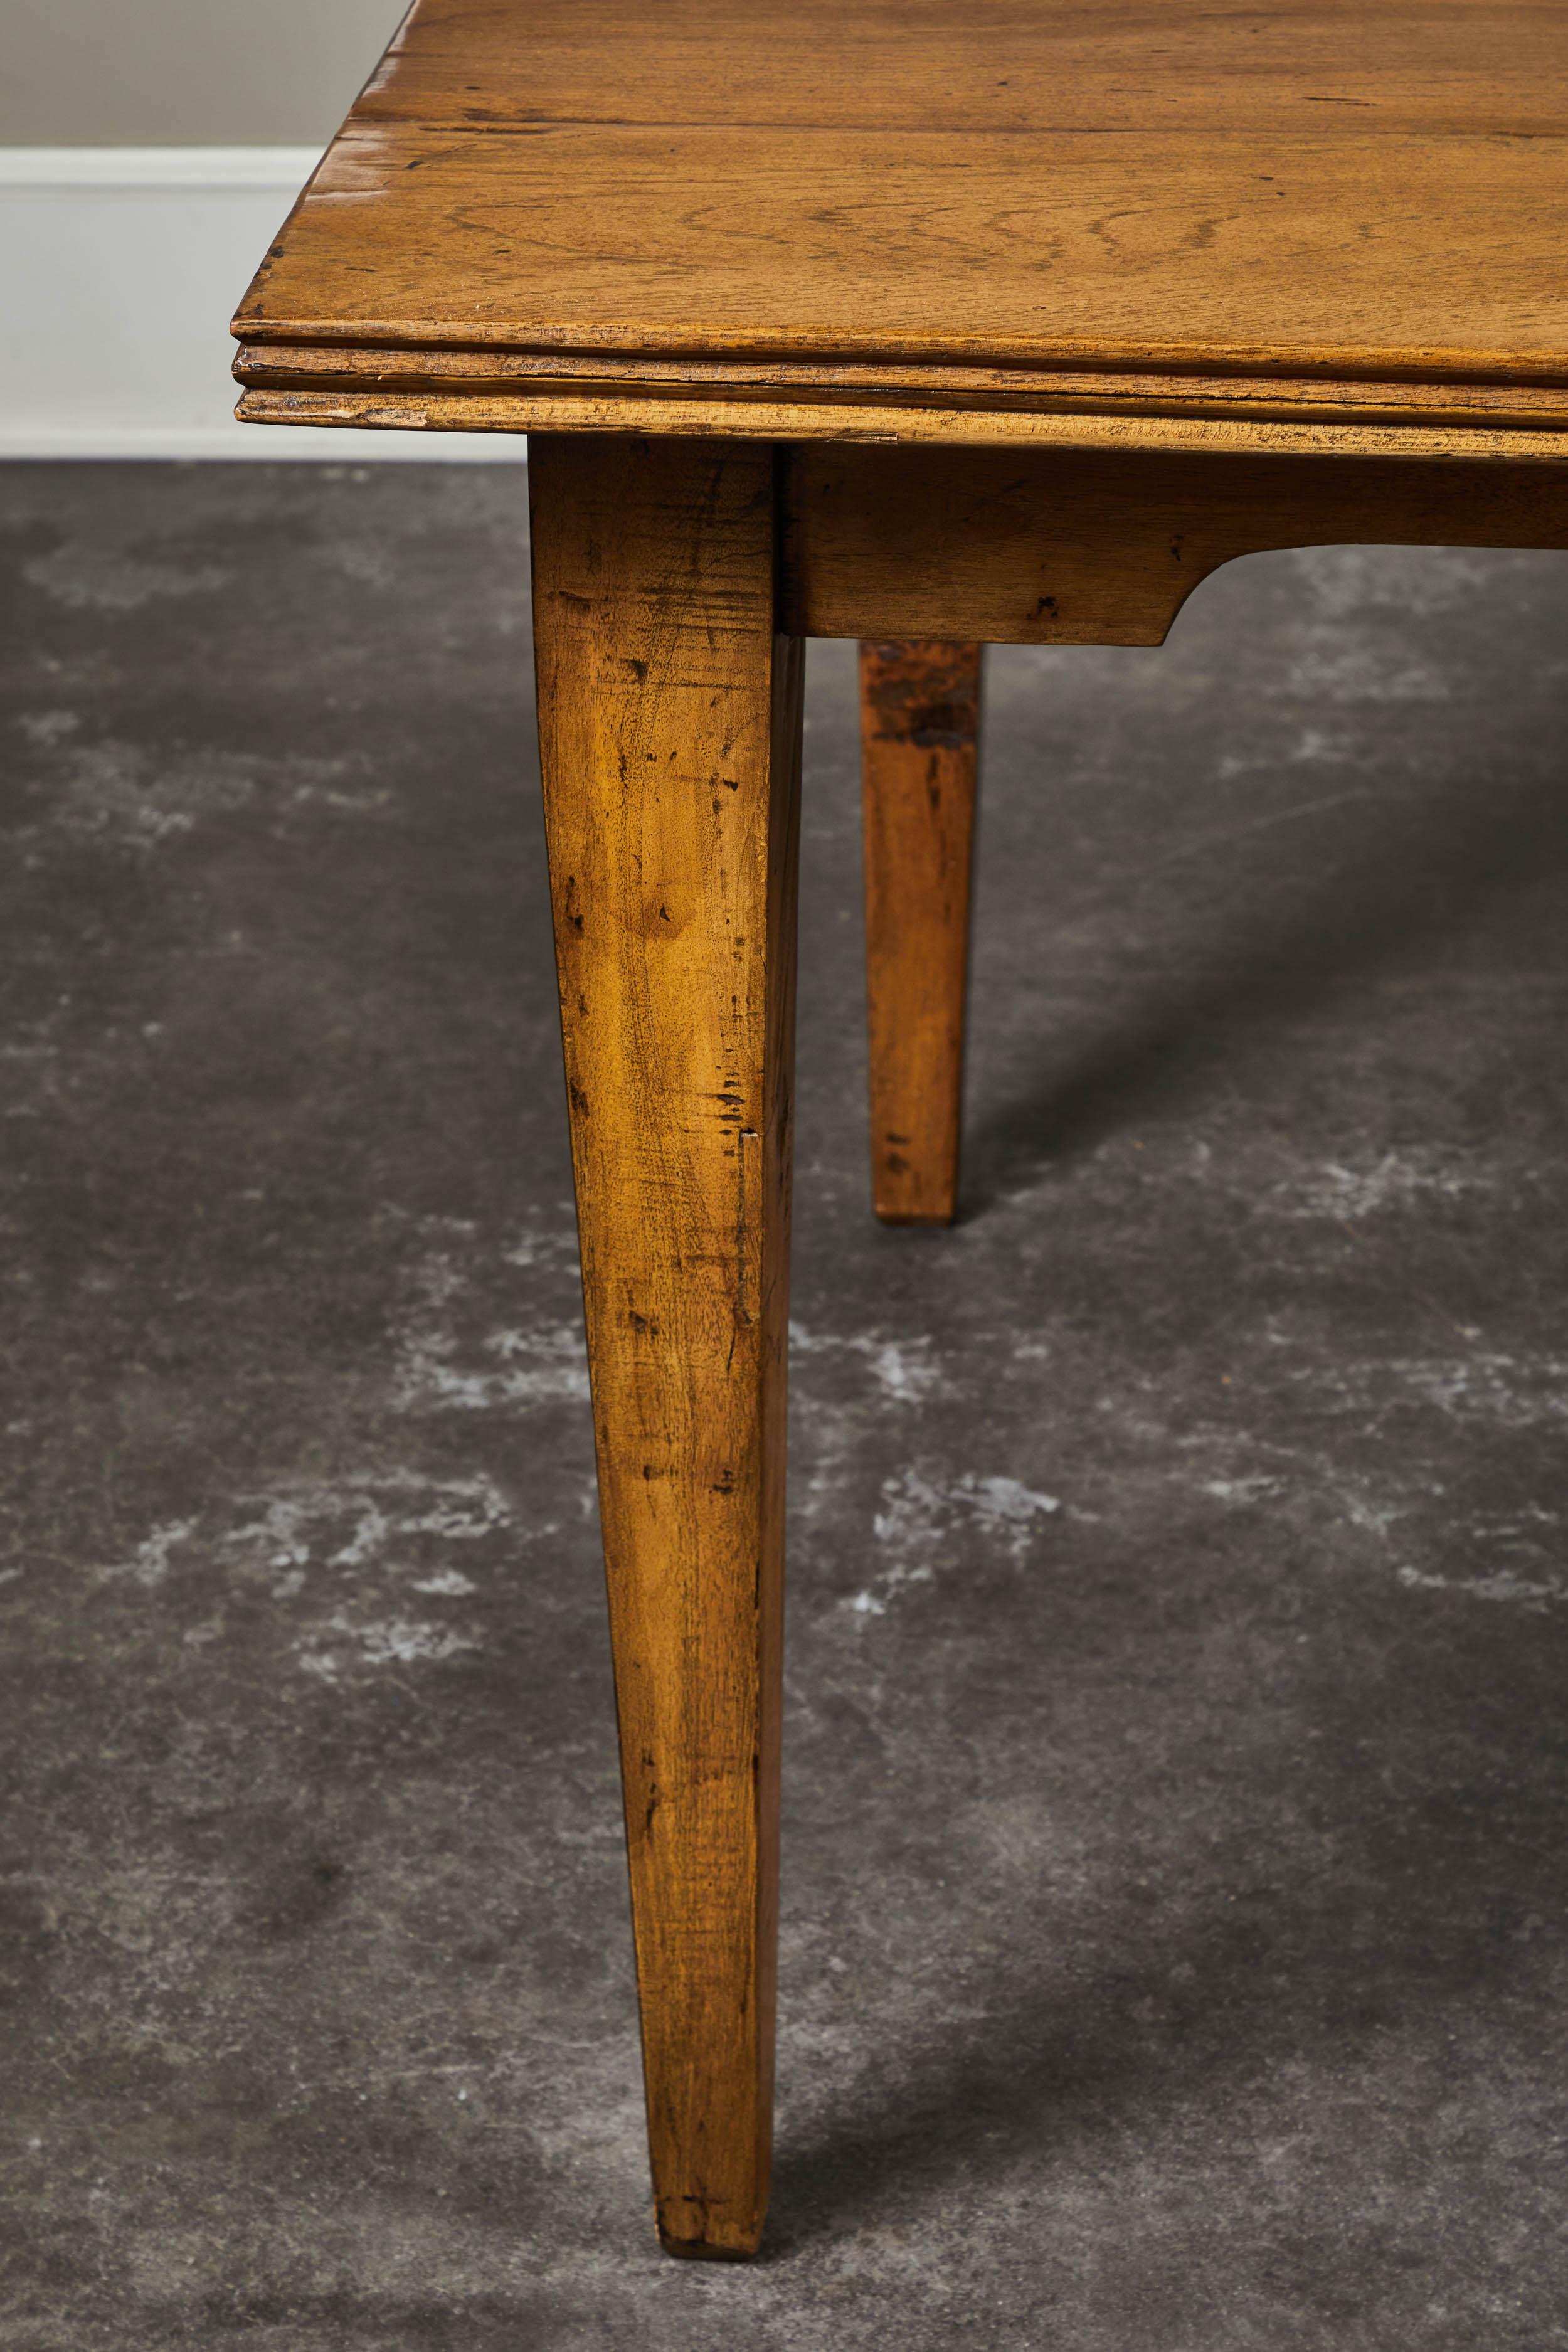 A 20th century Indonesian teak dining table. Thick old growth 1.5” teak planks, with rustic ridged detailing along edge. Soft apron and farmhouse style allows ample room for armchairs.